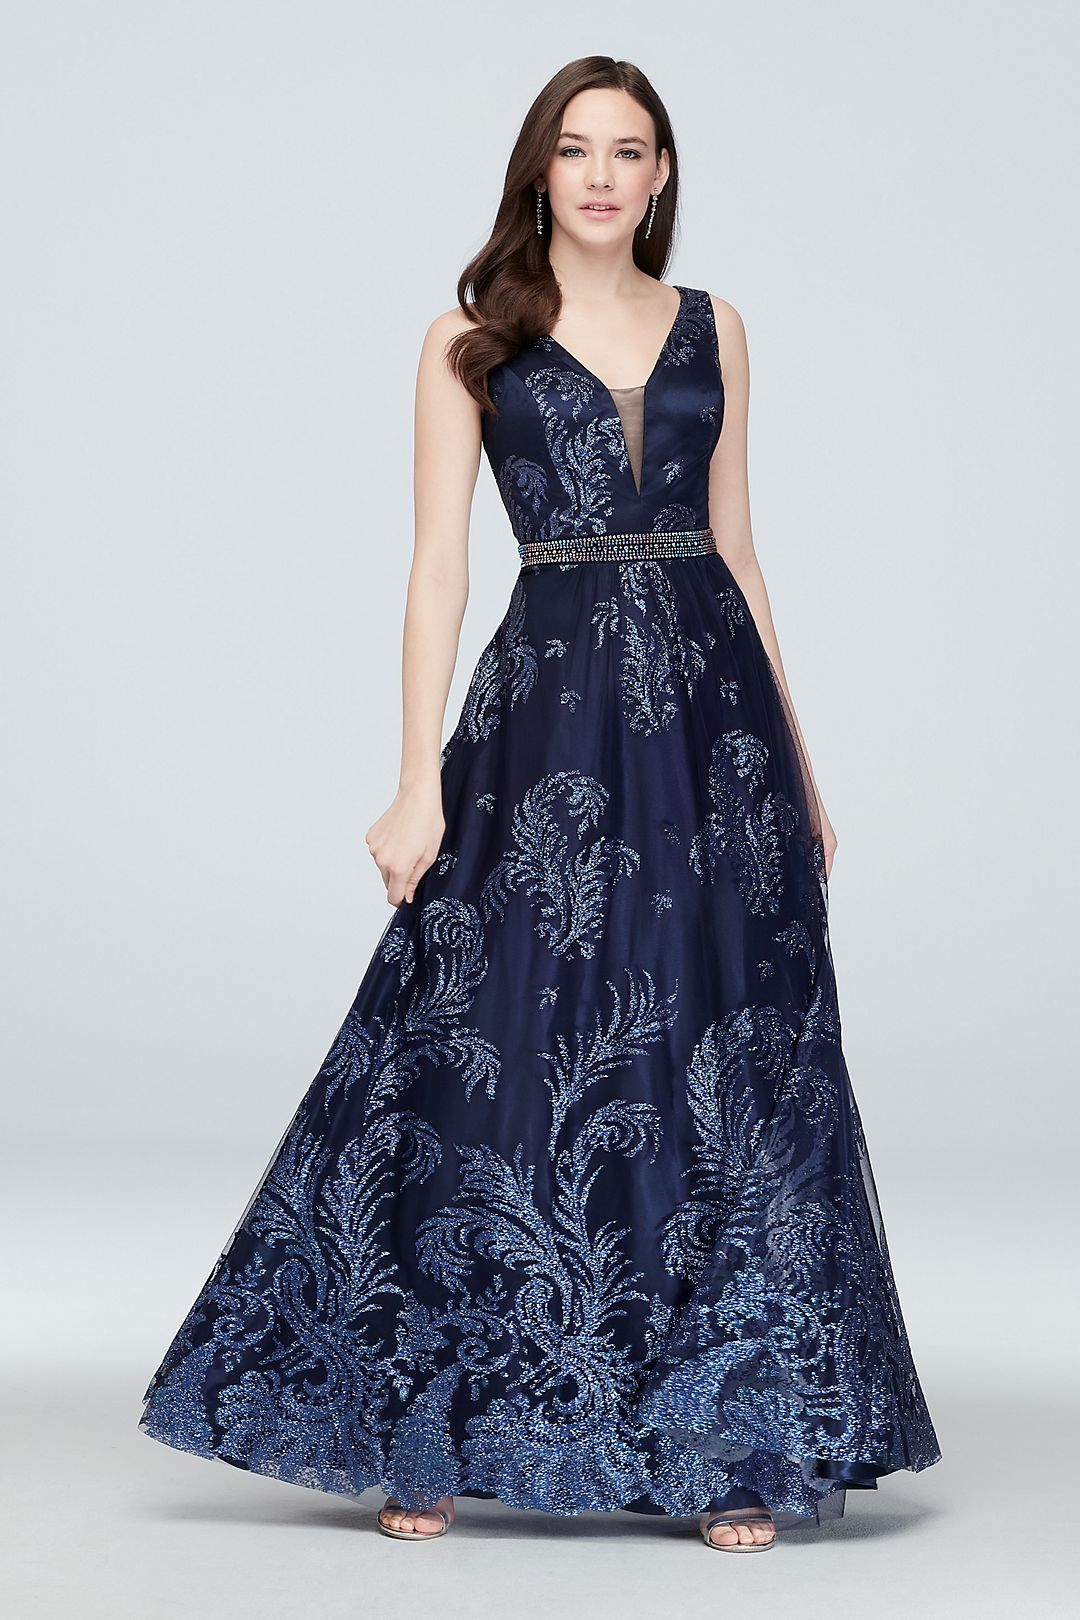 Belted Tulle Glitter Brocade Gown with Deep V-Neck Image 1